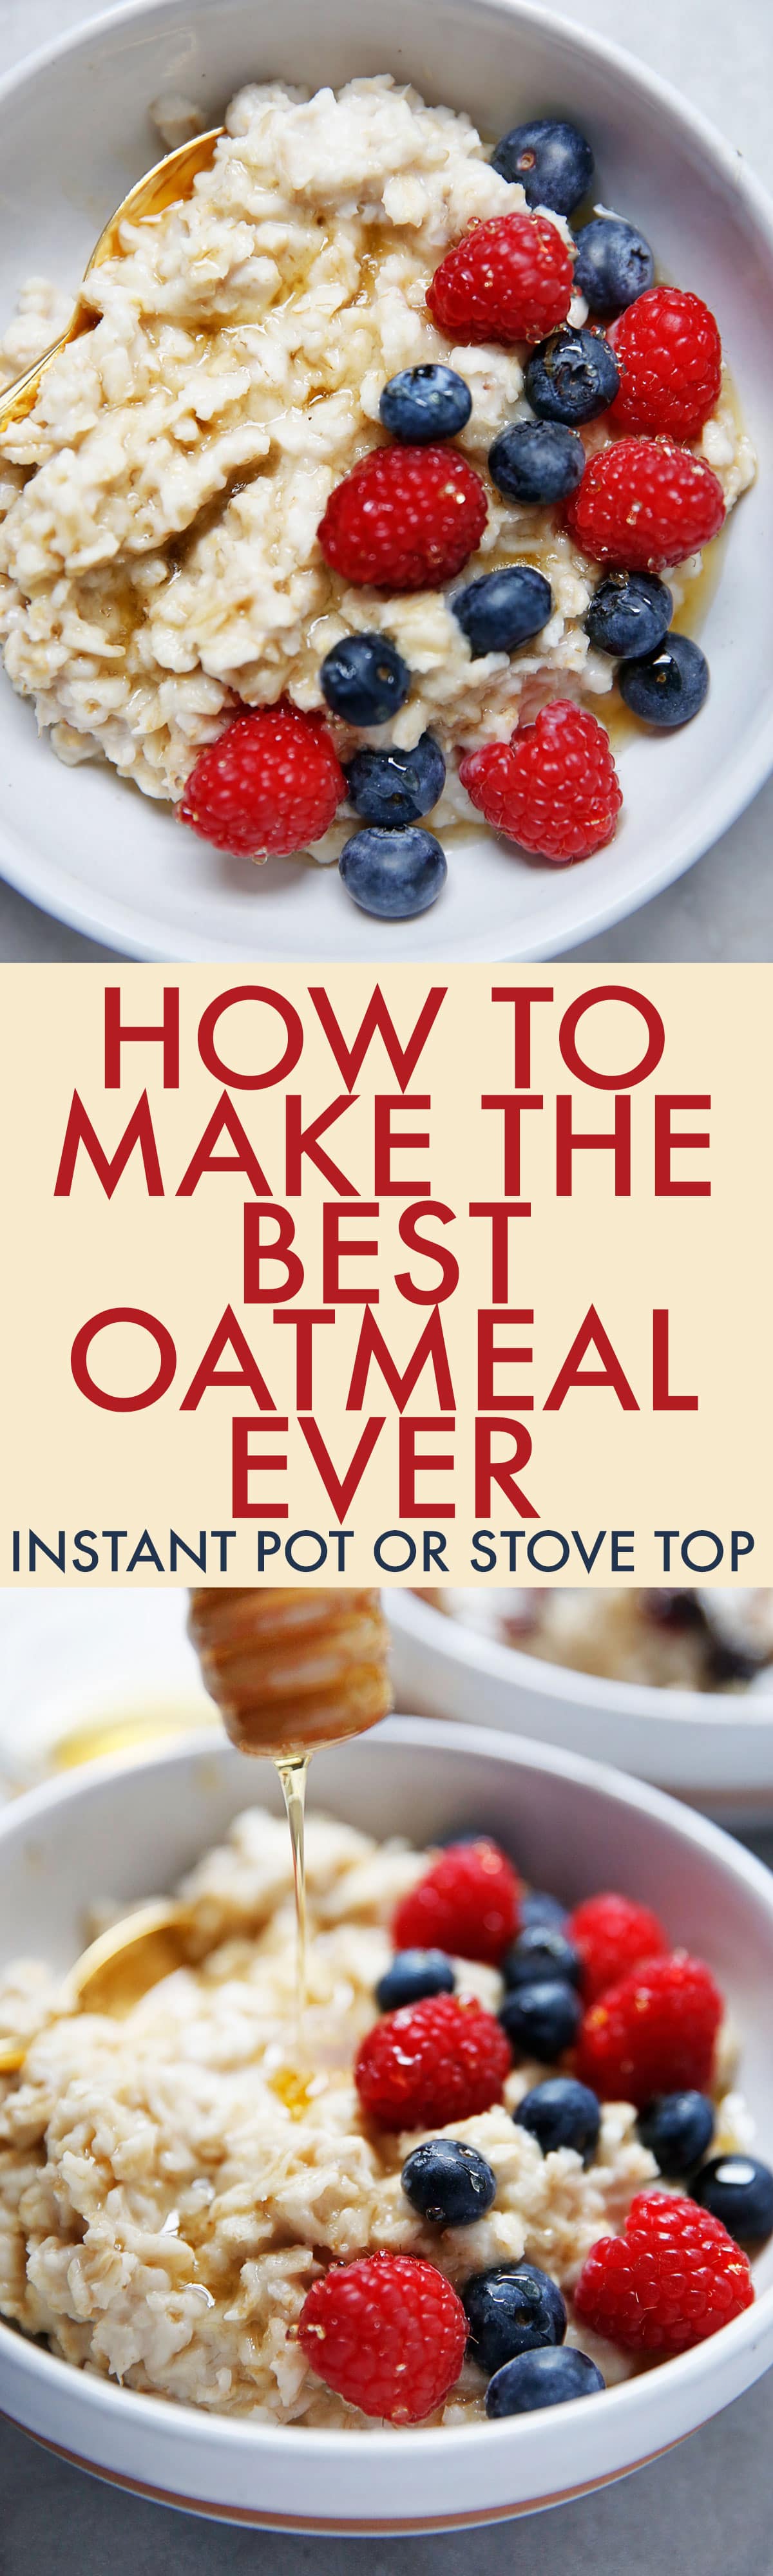 How to Make THE BEST Oatmeal